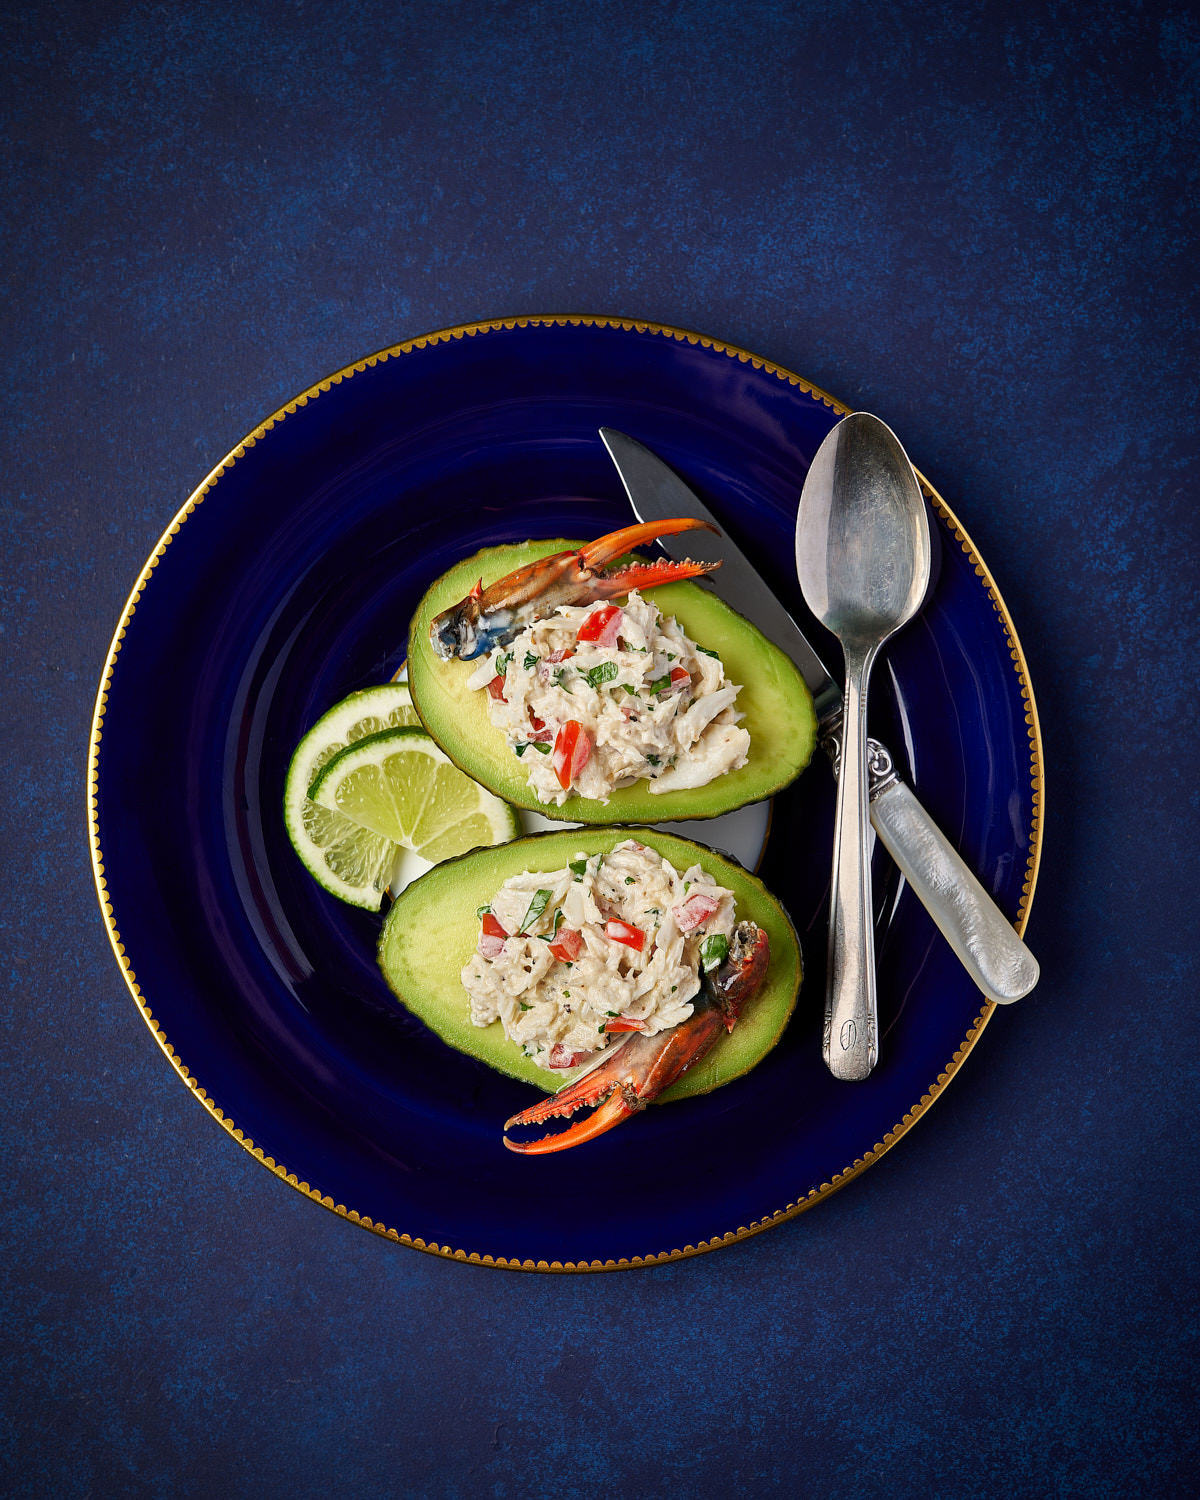 Editorial Cookbook Food Photography of Alligator Pear Stuffed with Crabmeat